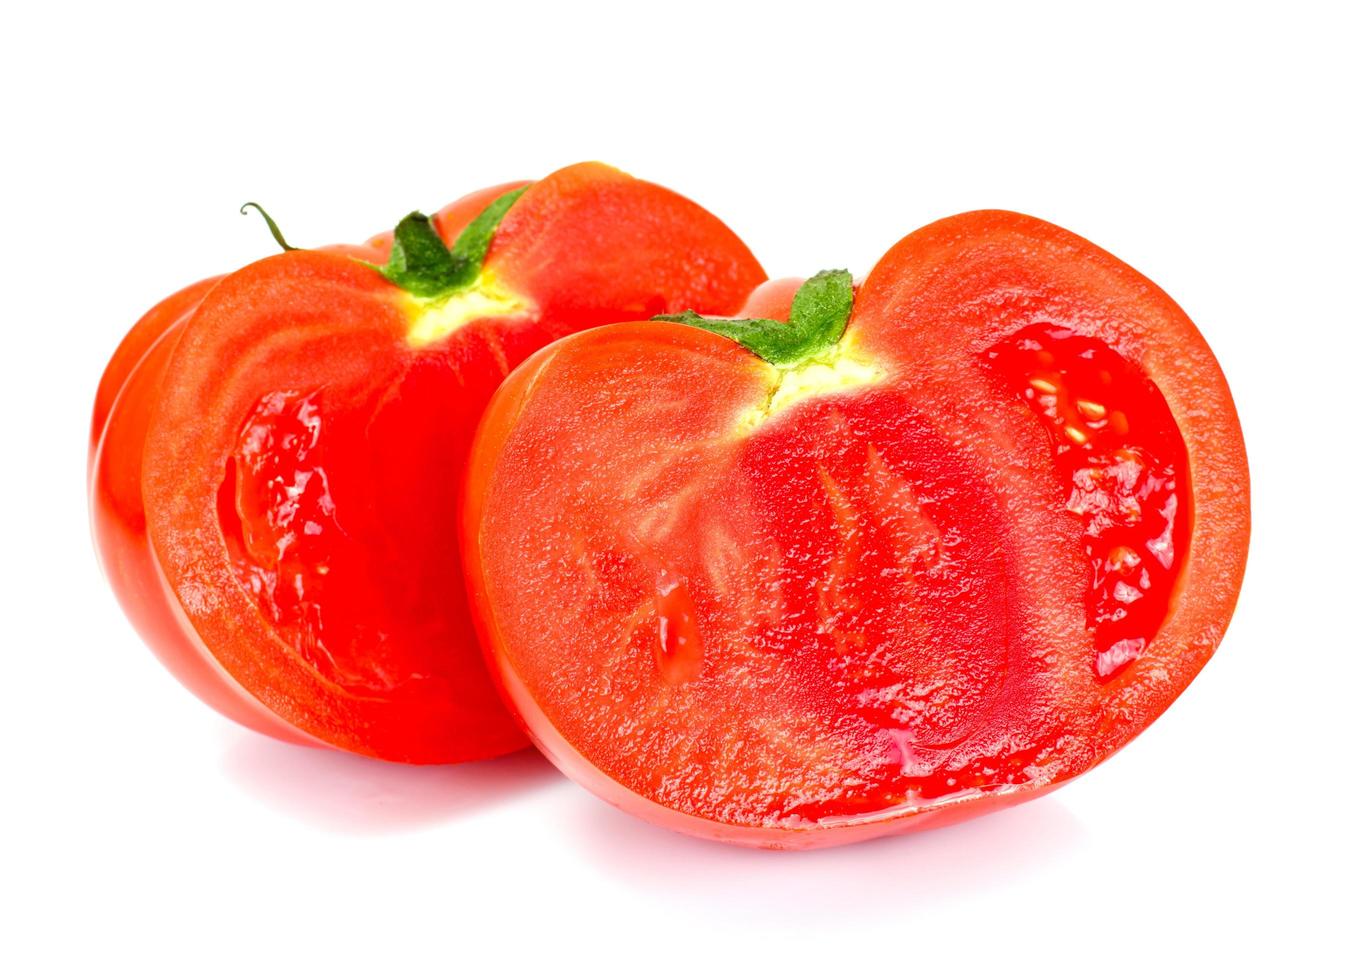 Red Tomatoes Isolated on a White Background photo